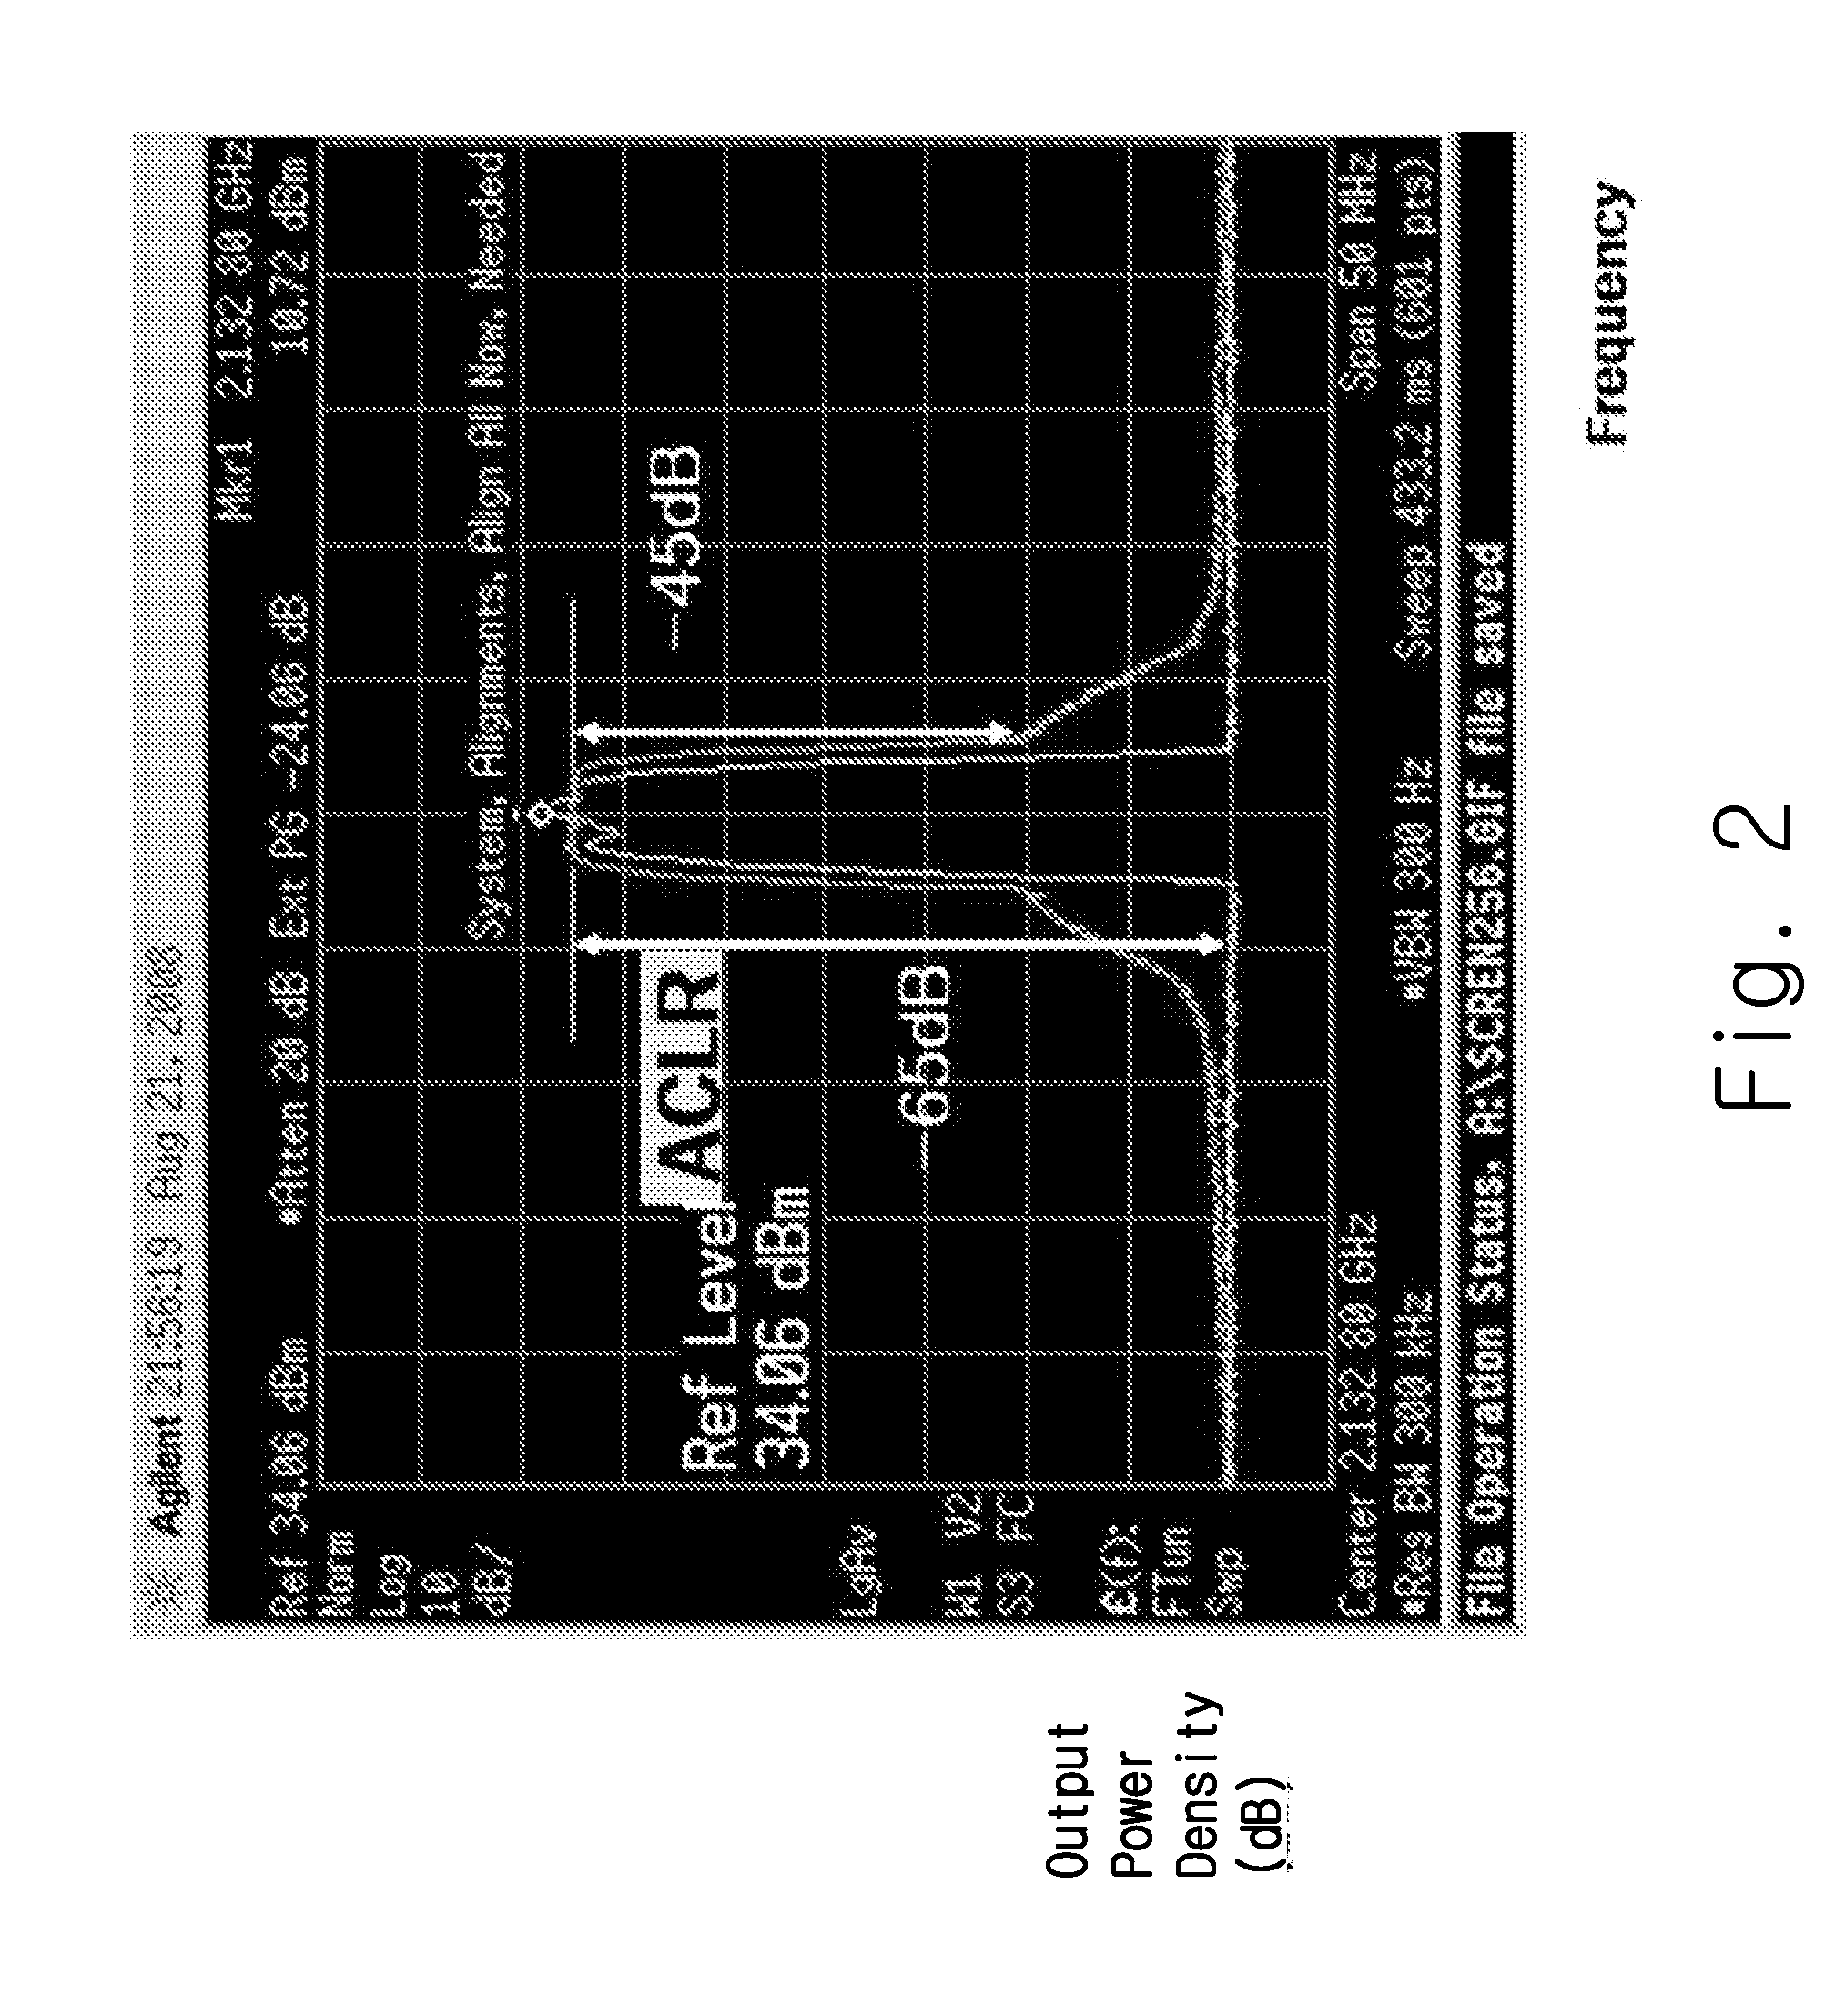 Amplification system for interference suppression in wireless communications